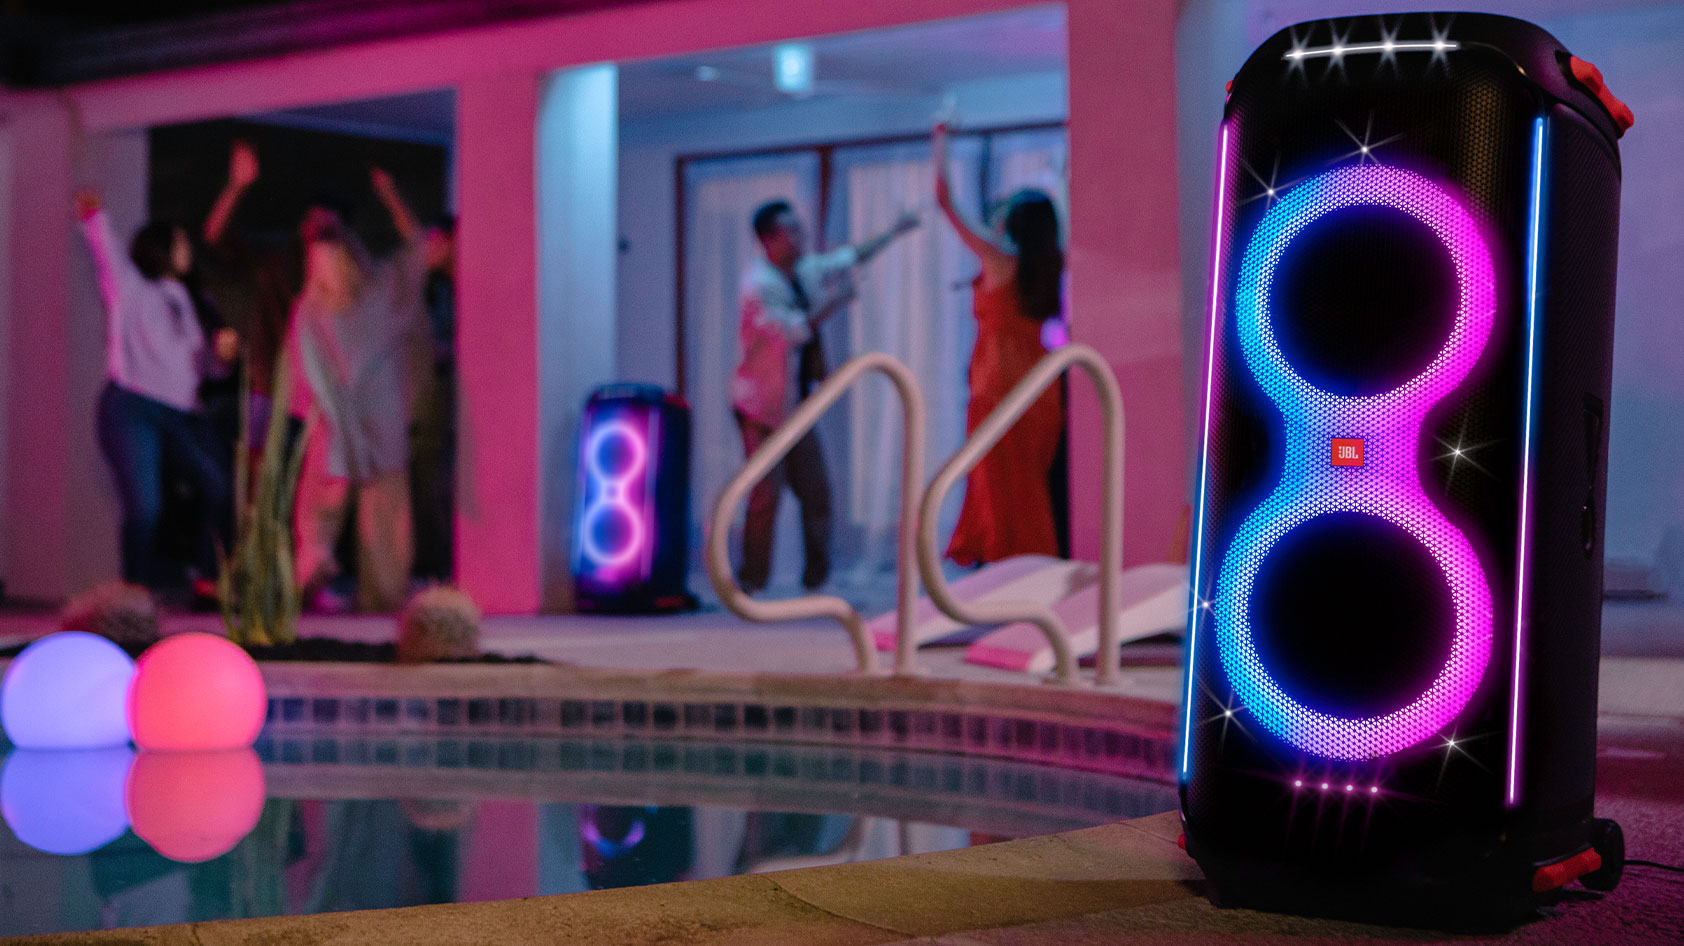 The JBL Partybox 710 speaker is poolside with people partying in the background.